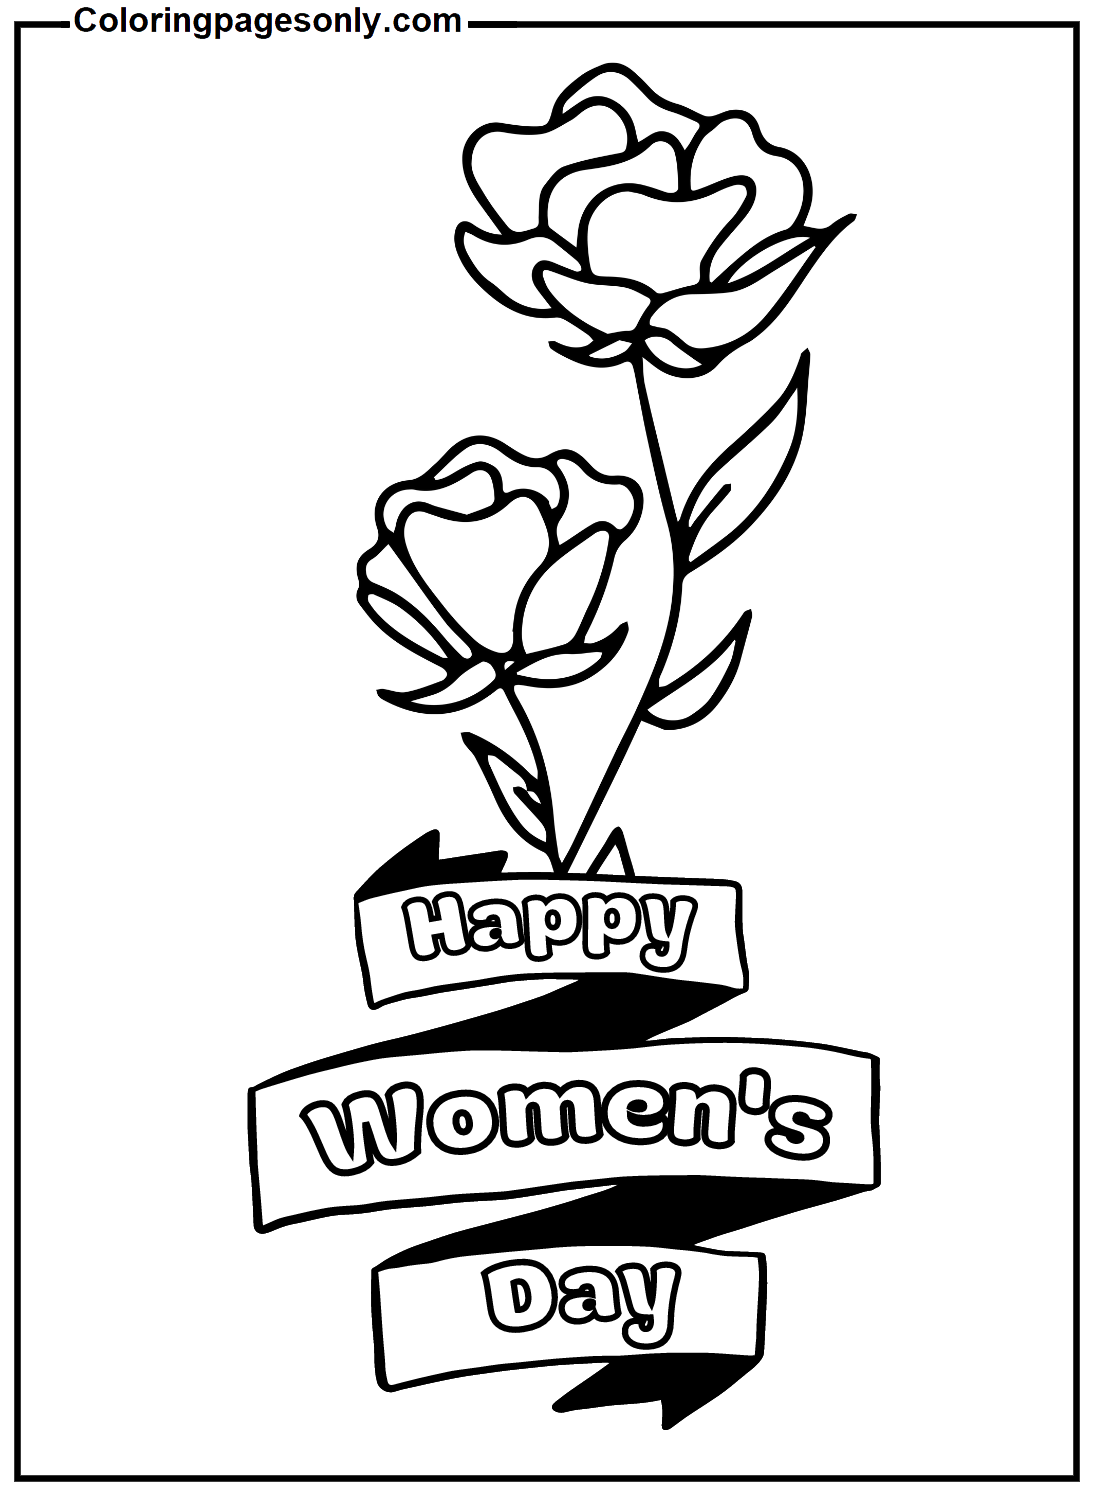 Happy Women's Day With Roses Coloring Pages